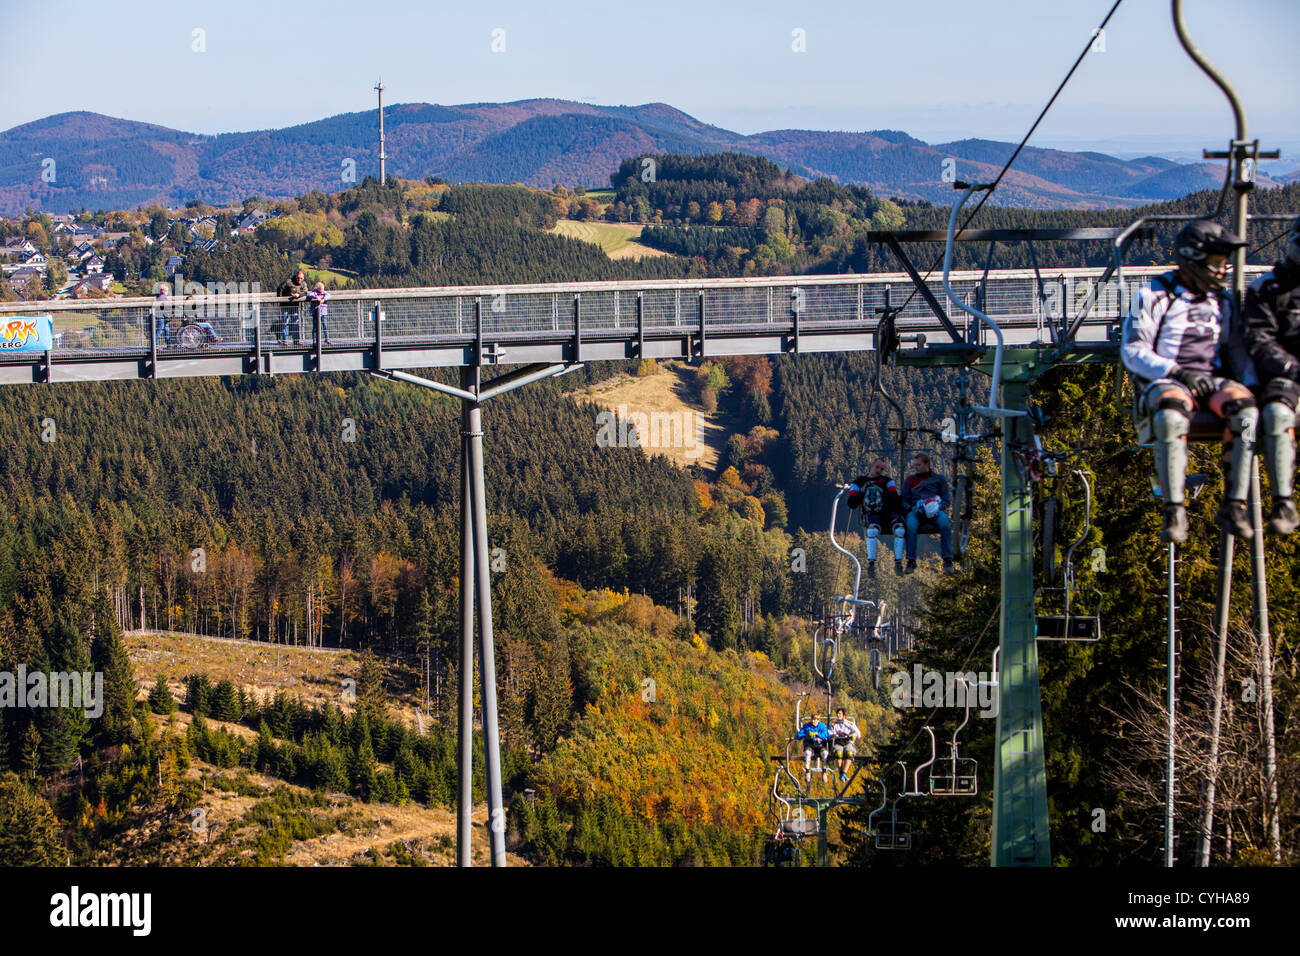 Panoramic experience bridge, 400 meter long bridge over trees and a valley to observe the nature of the region. Stock Photo